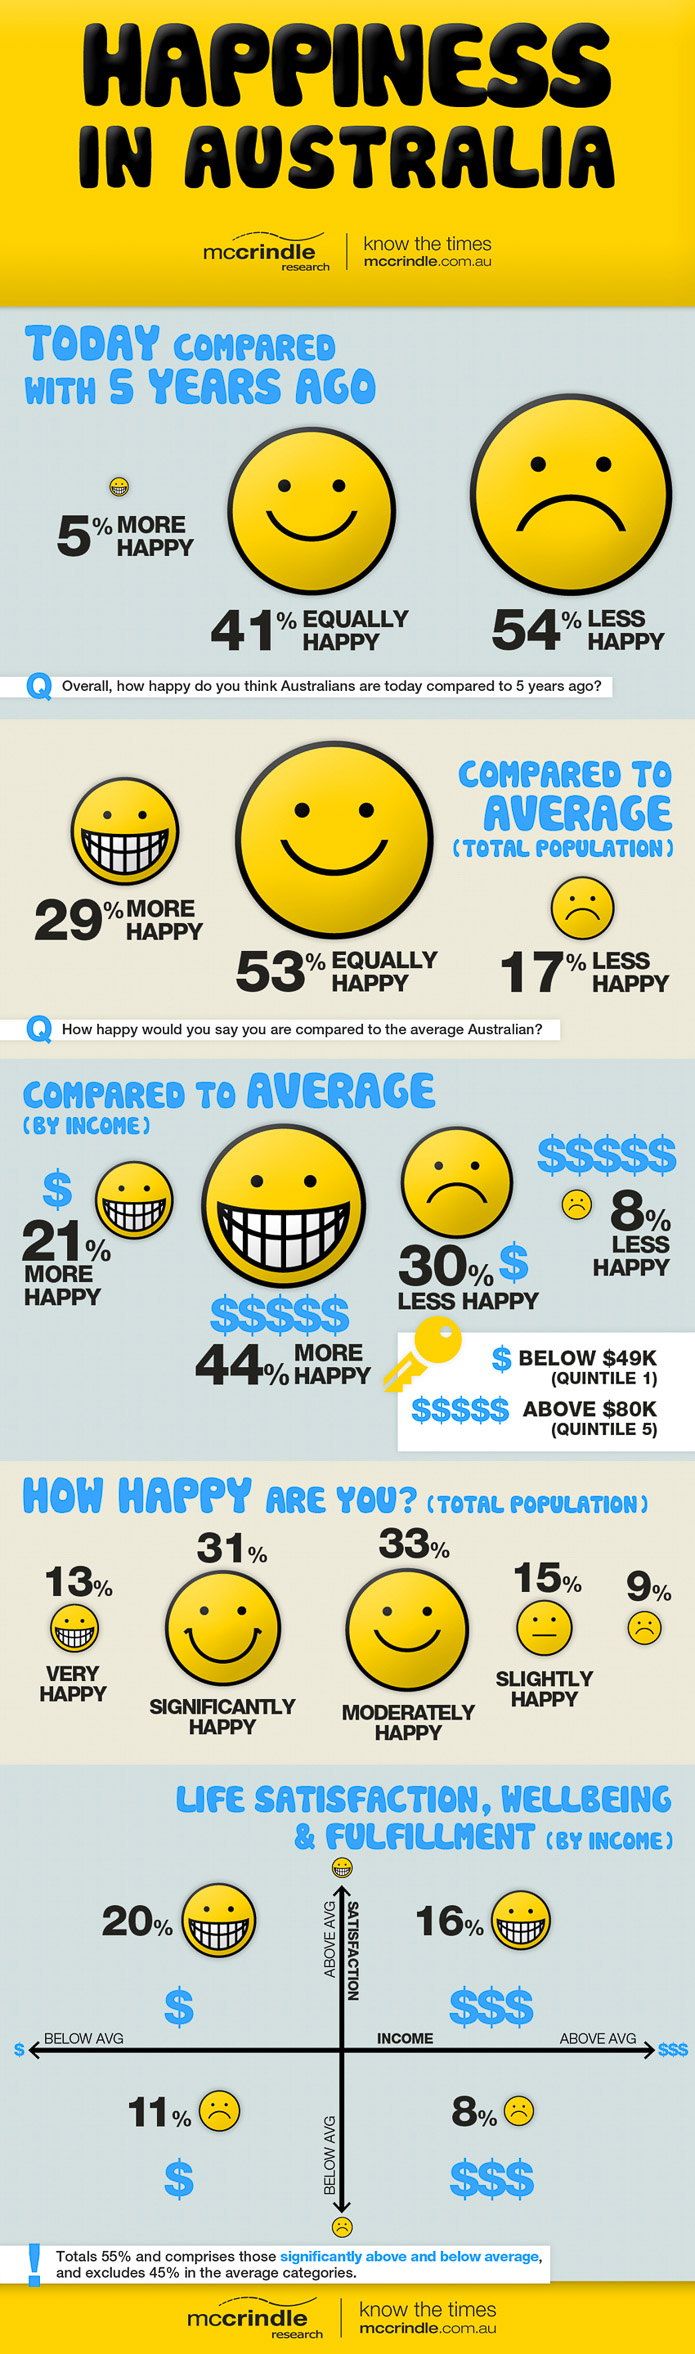 Happiness in Australia Infographic | International Day of Happiness | McCrindle Research